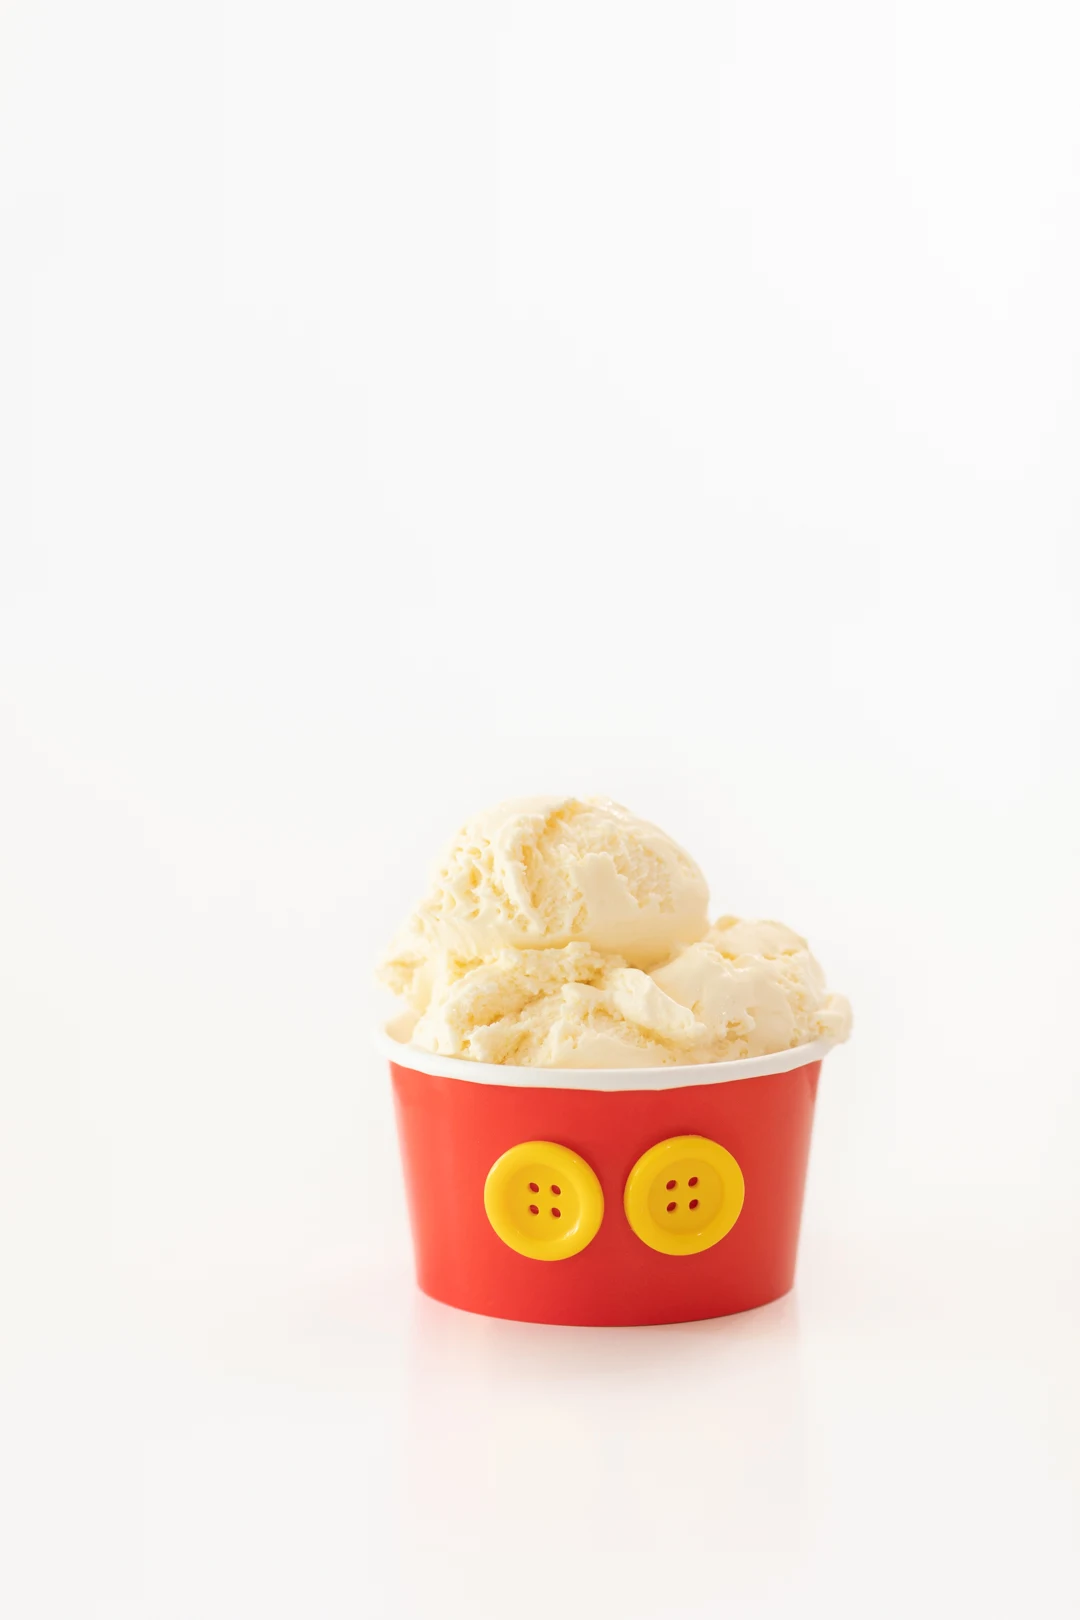 Mickey Mouse Cup with Yellow Buttons and Scoops of Vanilla Ice Cream